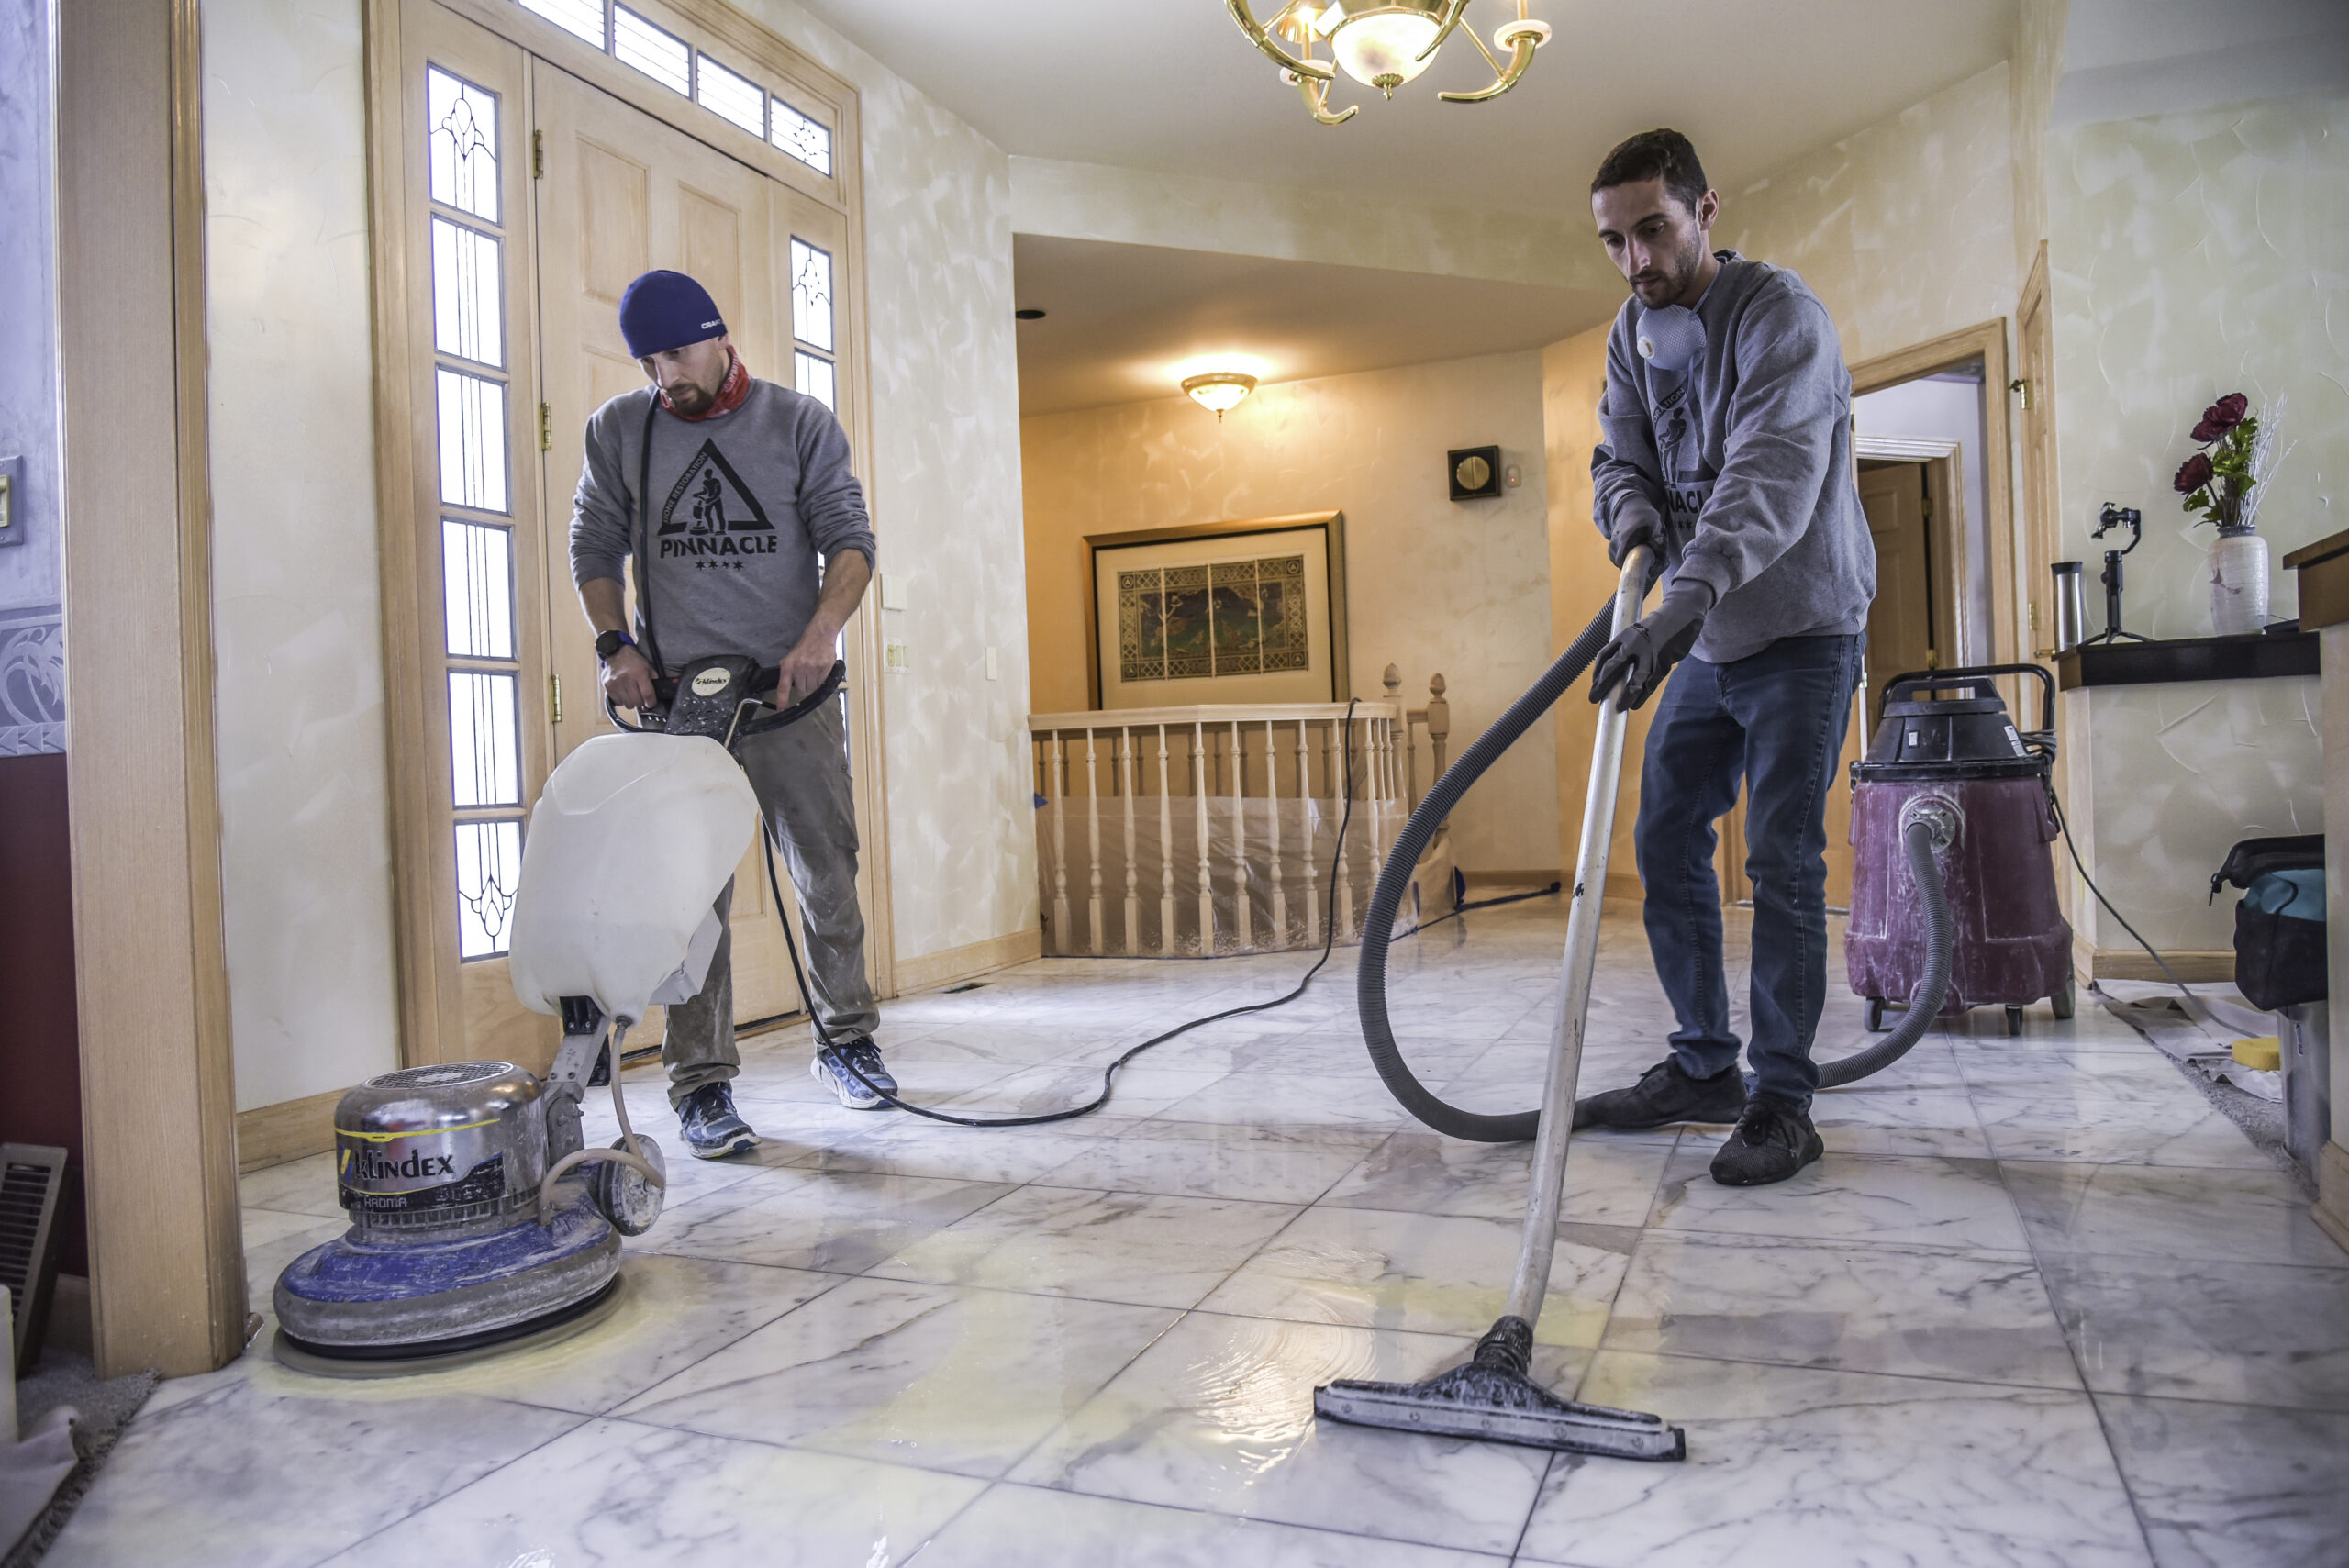 DO YOU NEED MARBLE FLOOR POLISHING? MARBLE SHOWER RESTORATION?  TUMBLED TRAVERTINE DEEP CLEANING? PORCELAIN TILE AND GROUT CLEANING? – WE GOT IT ALL COVERED.